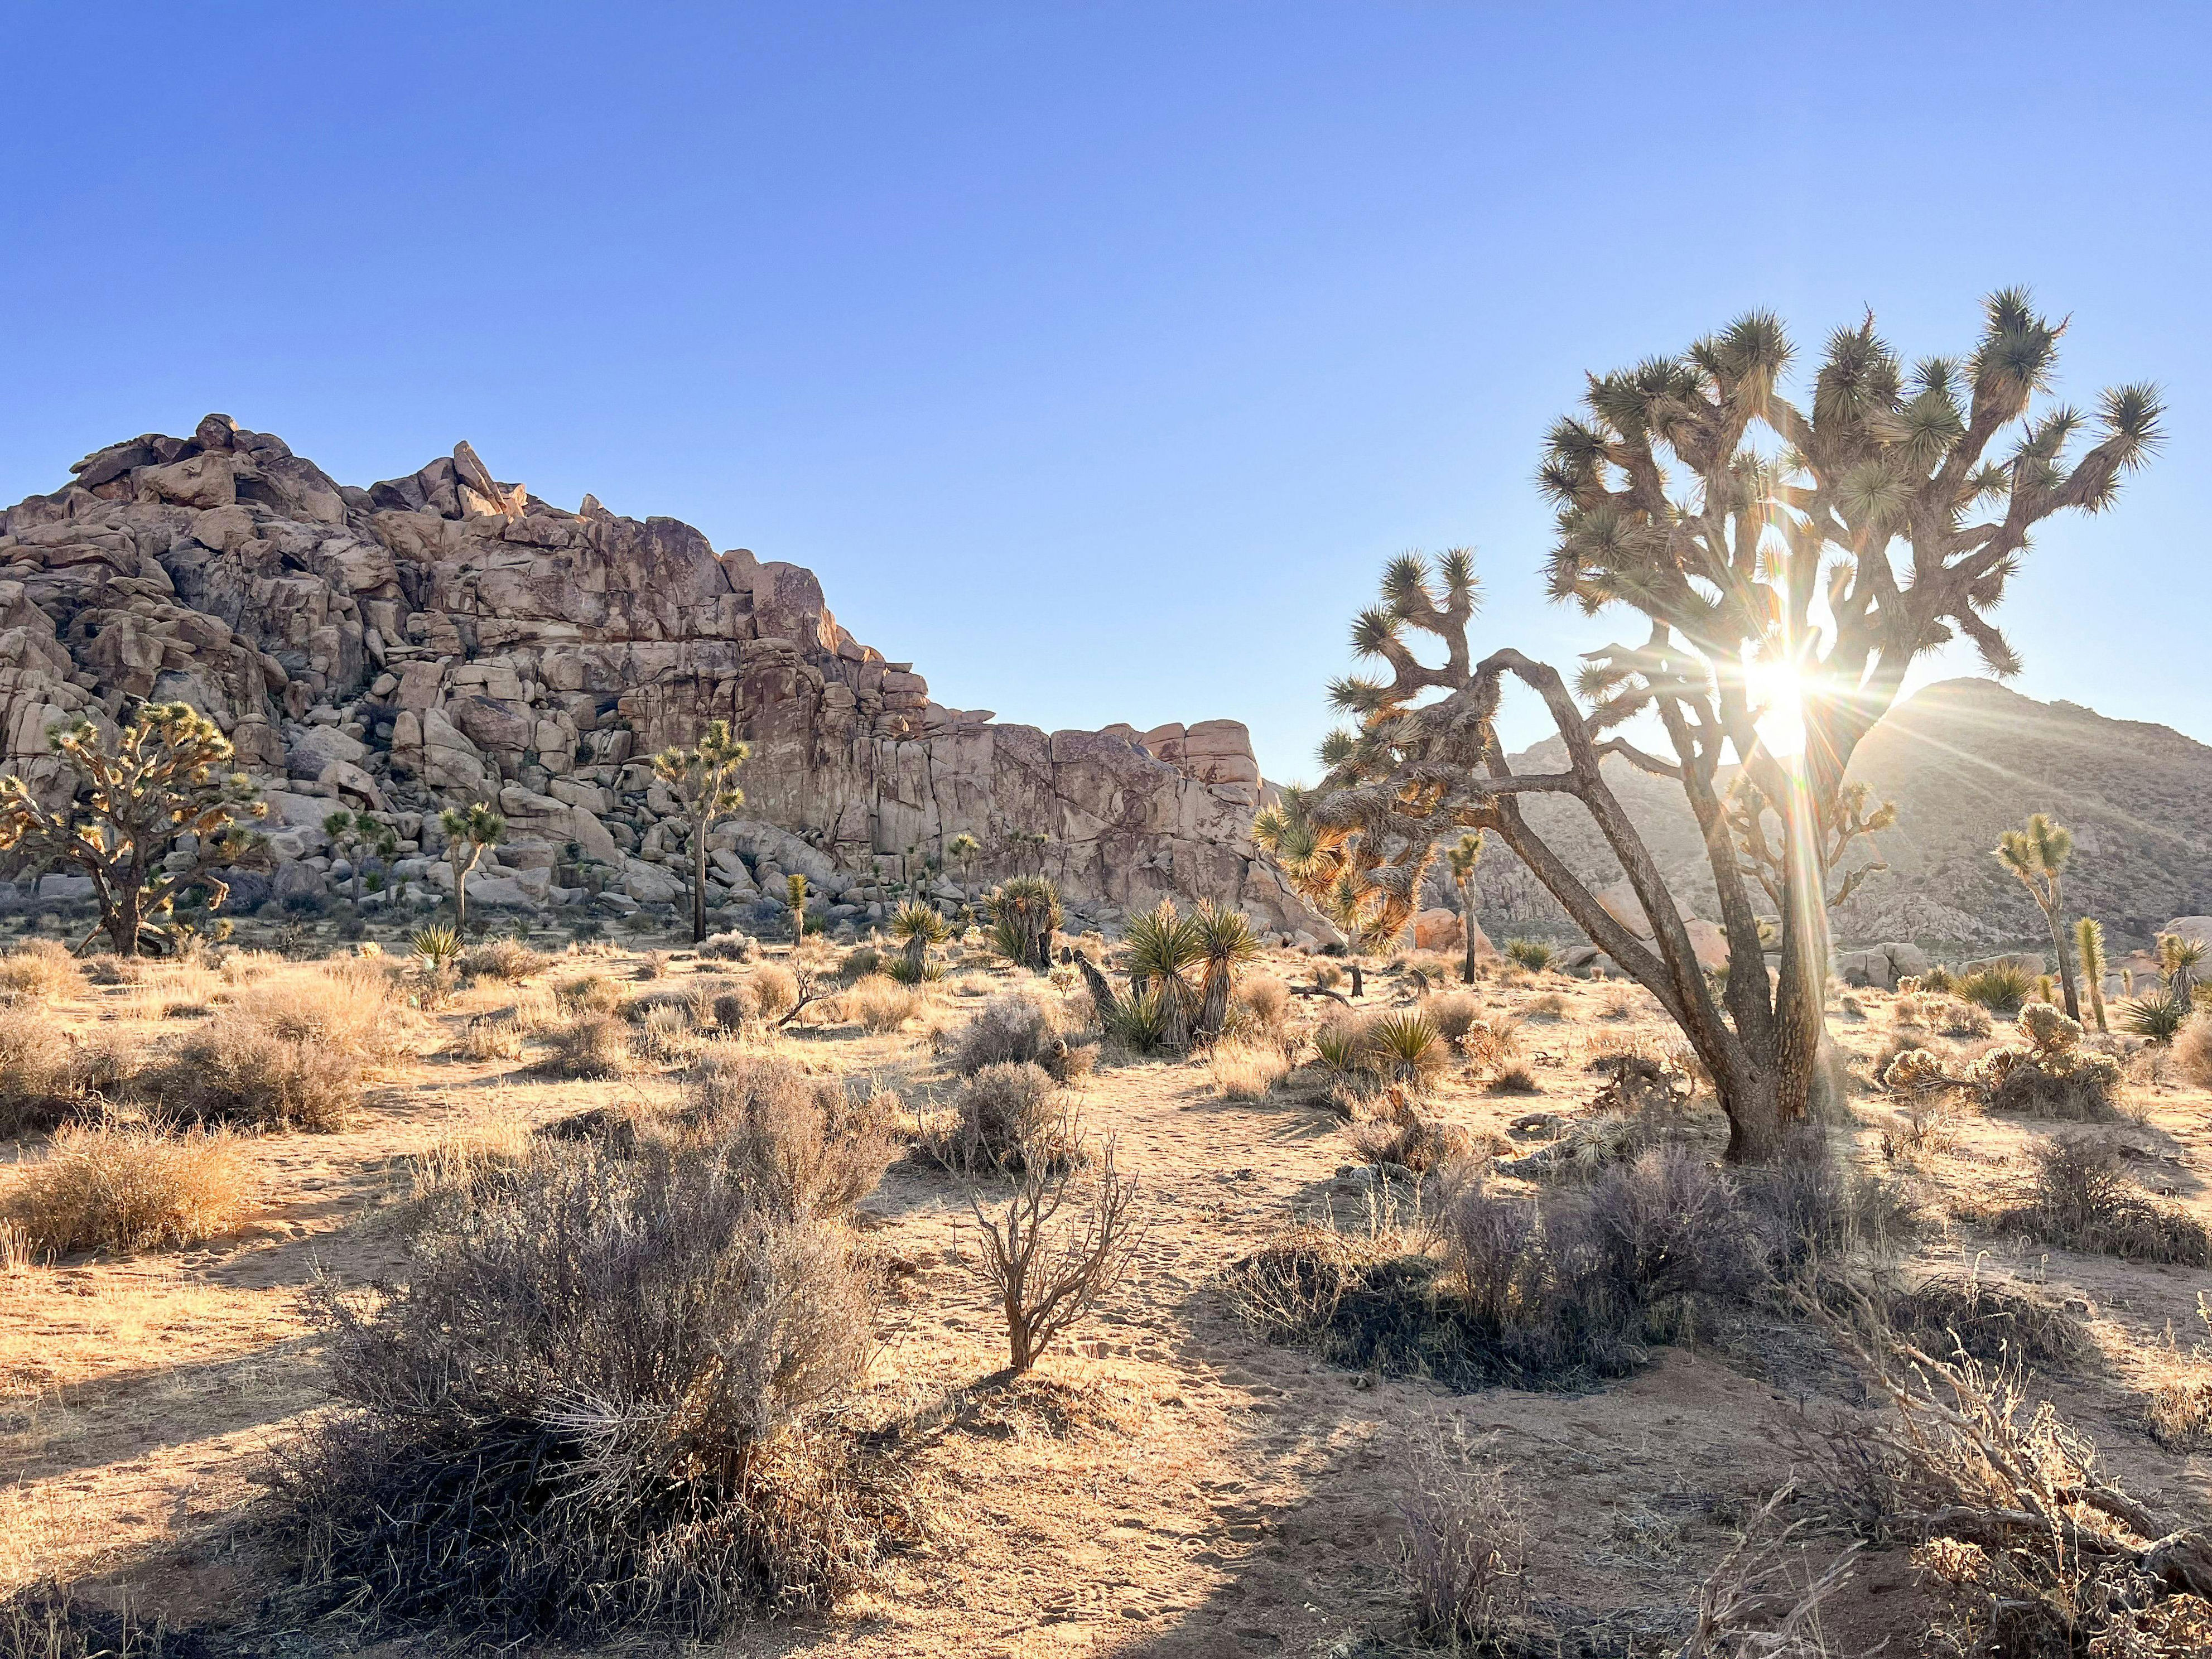 <h3>Joshua Tree, California</h3><p>Joshua Tree was designed with nature girlies in mind! It's made up of two different deserts, both with their own unique landscape, and dozens of picturesque hiking trails. The national park is just a two hour drive from Los Angeles, so flying into LAX is best if you're not a SoCal local. Make a list of your can't miss <strong><a href="https://www.brit.co/best-hikes-in-the-us/">hikes</a></strong> (we recommend Hidden Valley) and get an early start. After a morning of hiking, cool off at a hot springs hotel (day passes are available for $8-$45, depending on the location).</p>